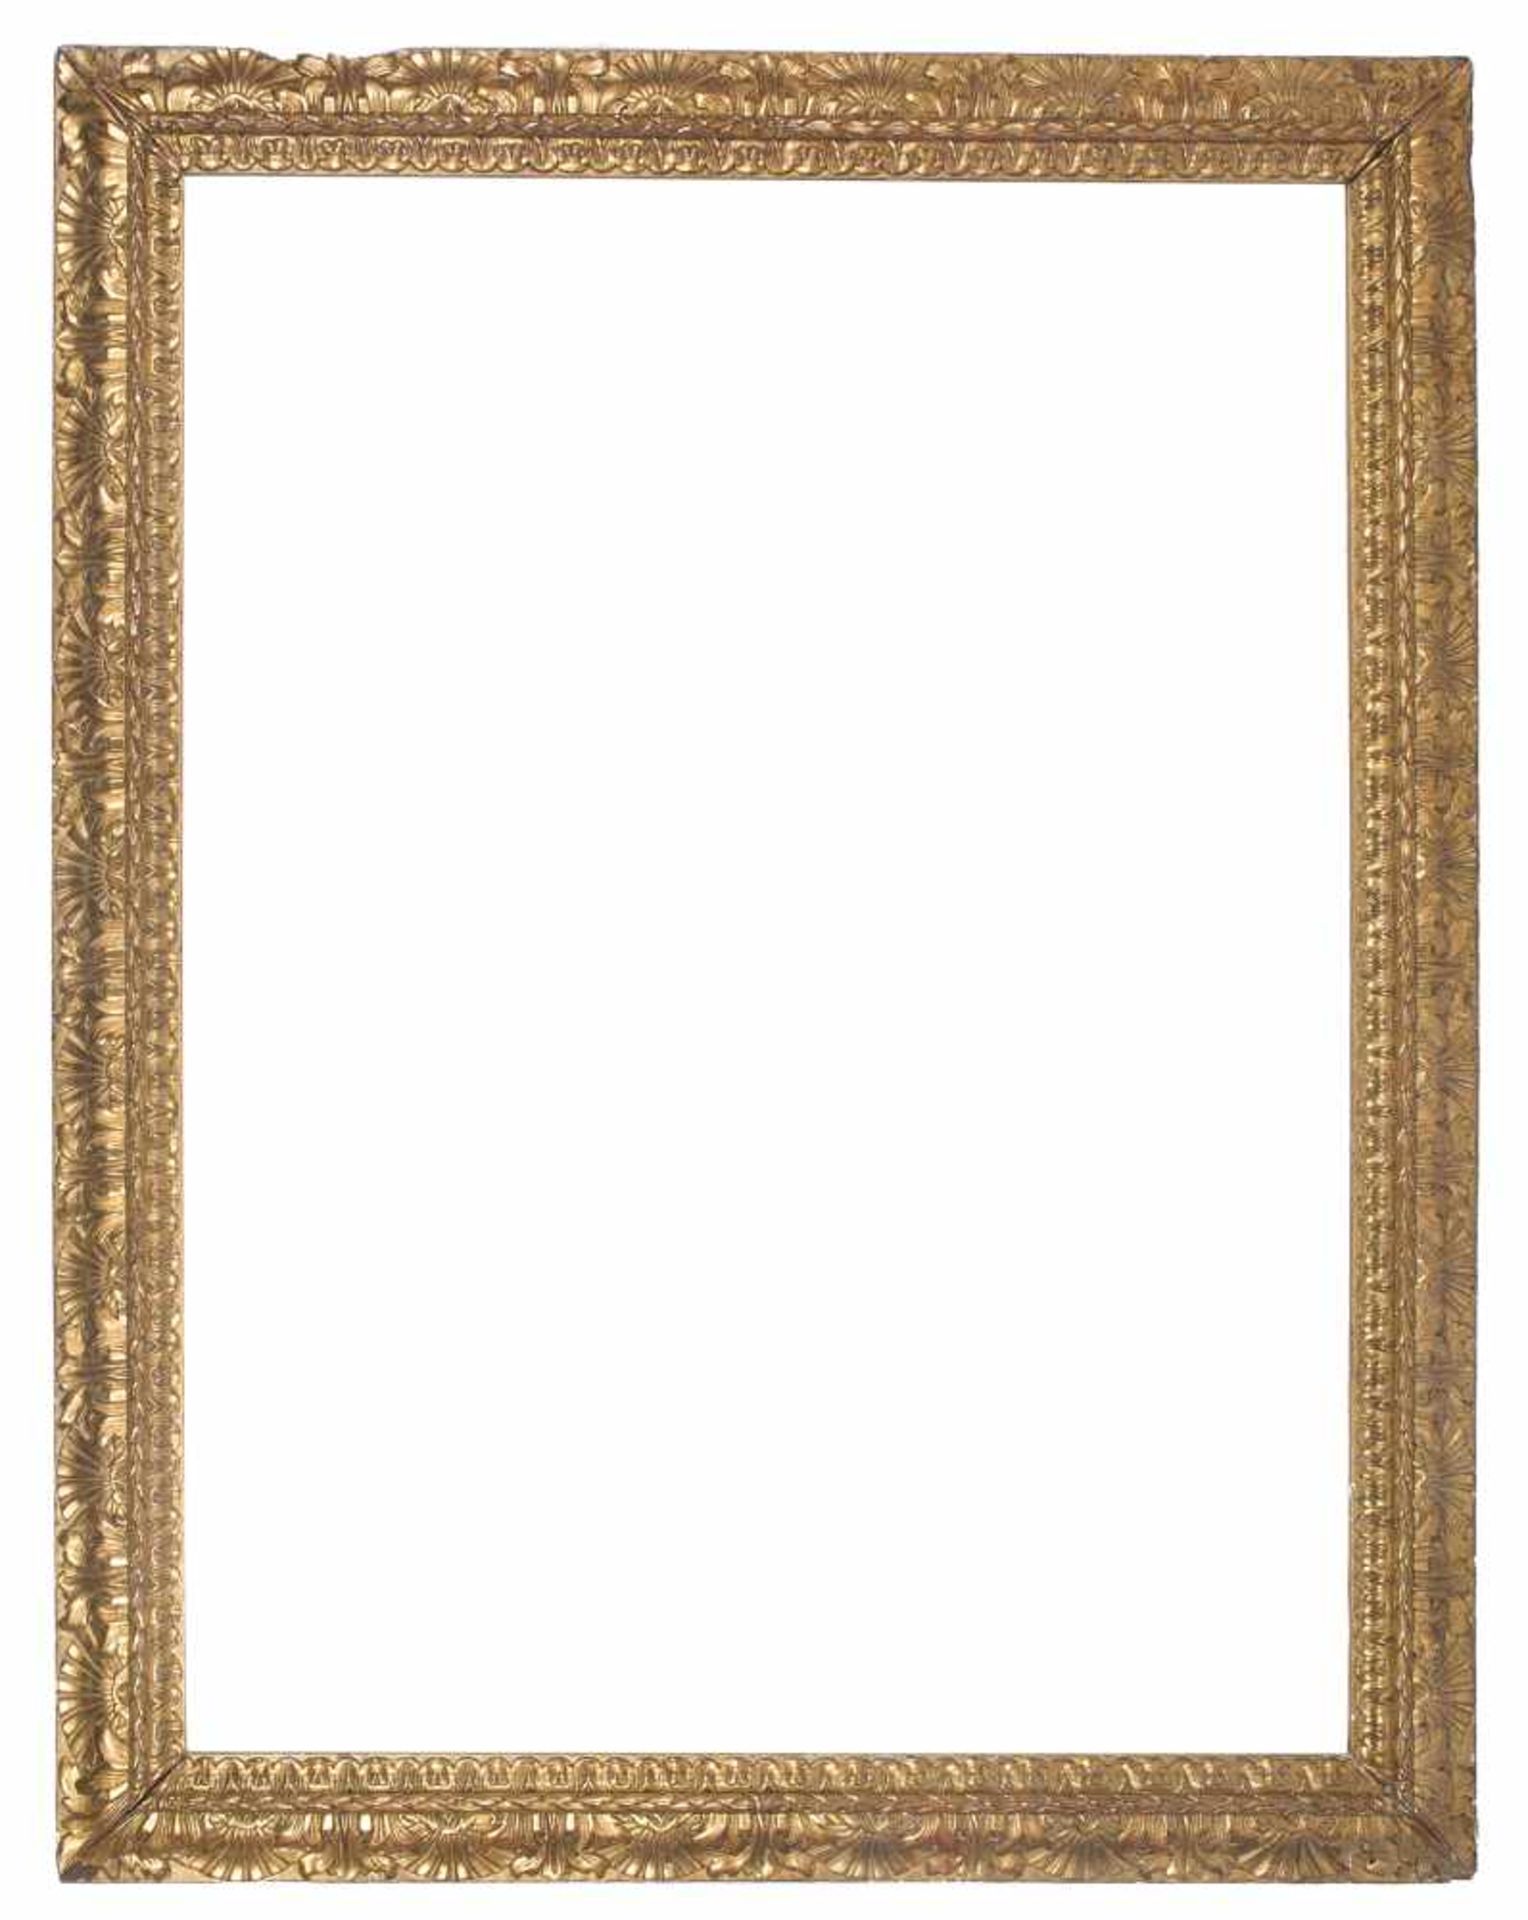 Large carved and gilded wooden Spanish frame. 17th century.